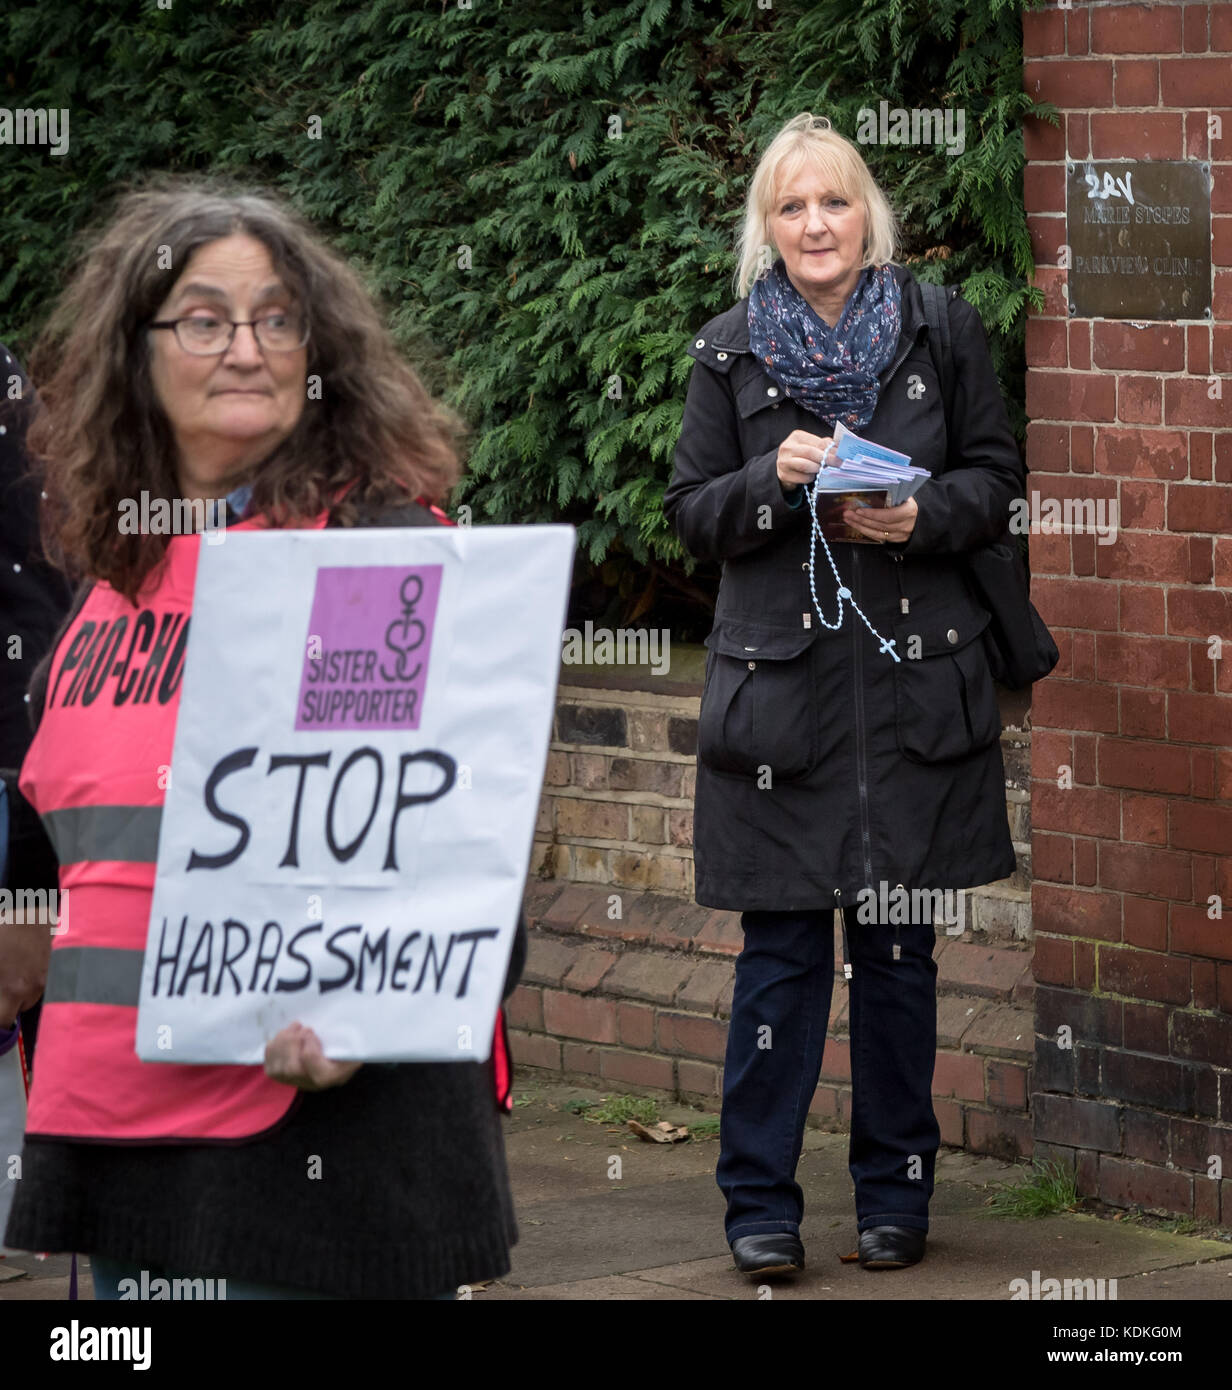 London, UK. 14th Oct, 2017. Sister Supporter, a women’s pro-choice direct action group, counter-protest Christian anti-abortion campaigners in Ealing. Credit: Guy Corbishley/Alamy Live News Stock Photo